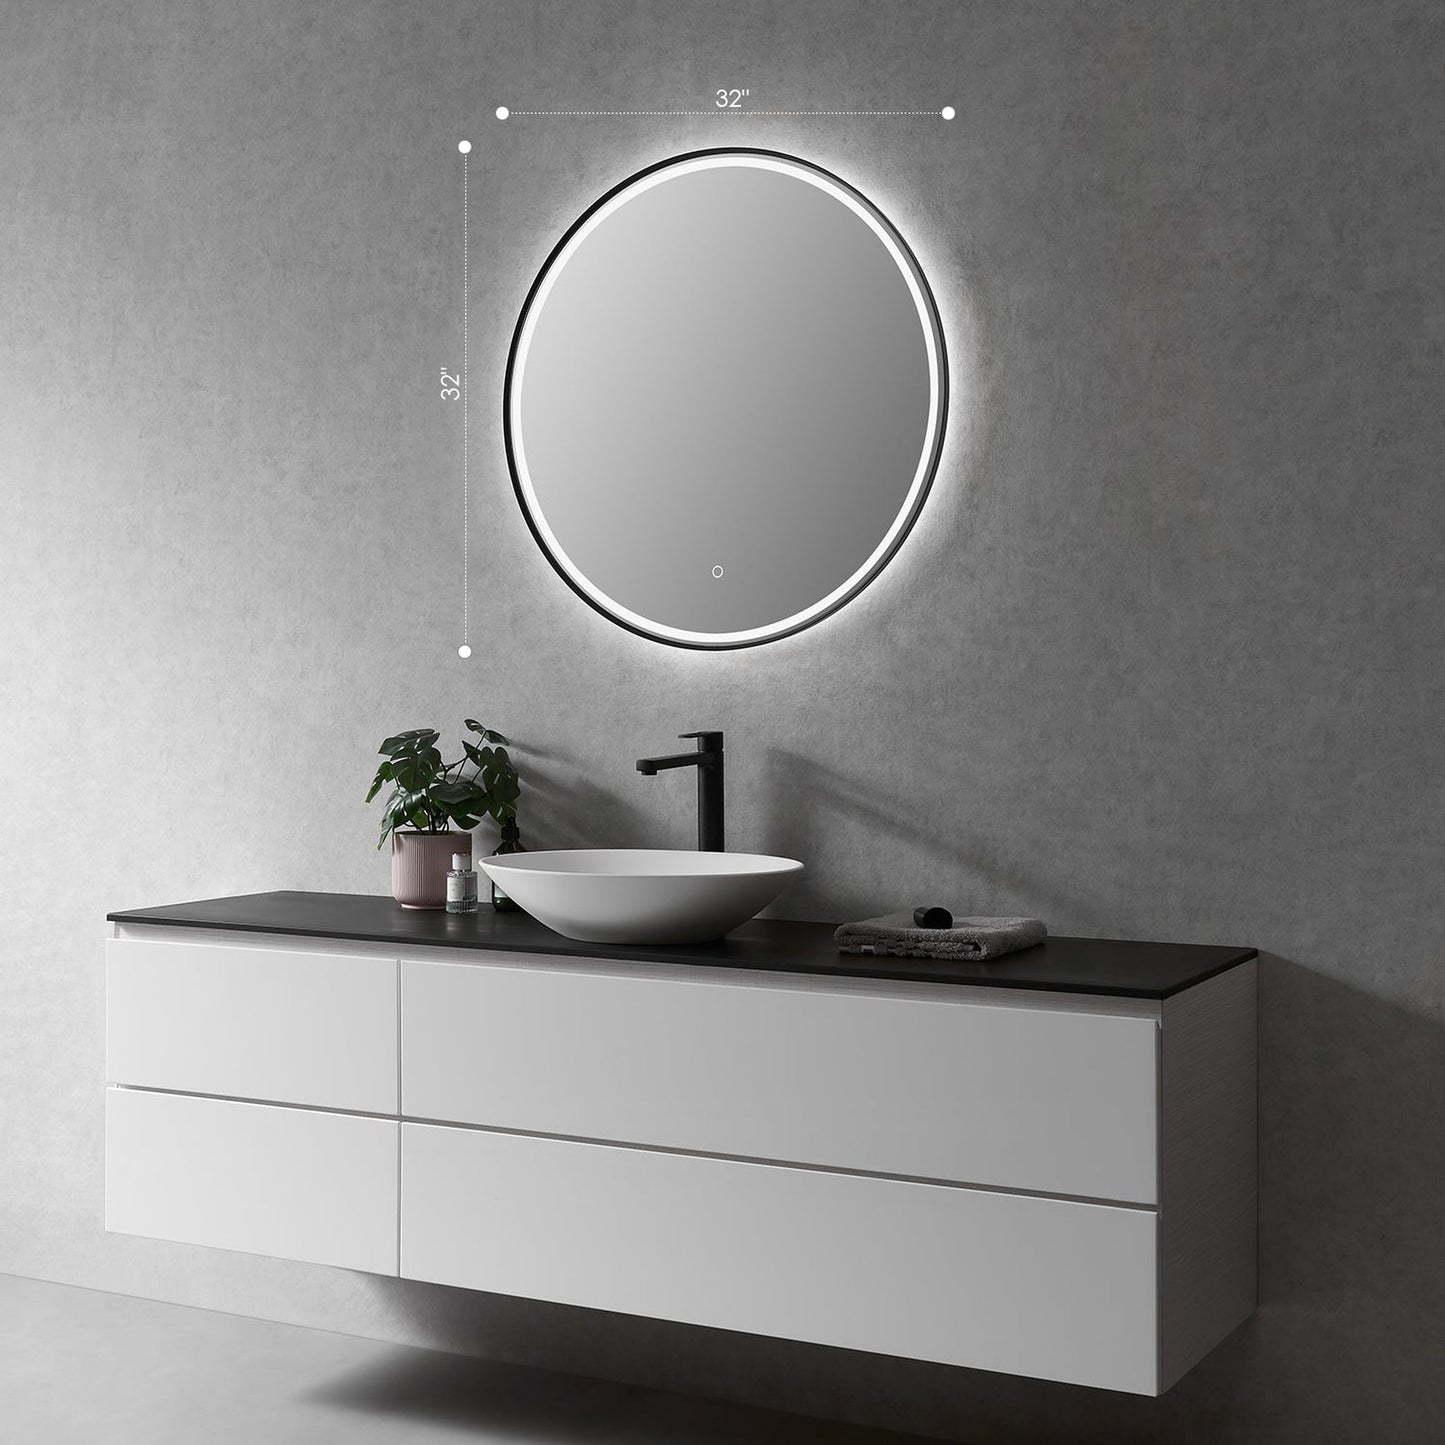 Altair Palme 32" Round Matte Black Wall-Mounted LED Mirror